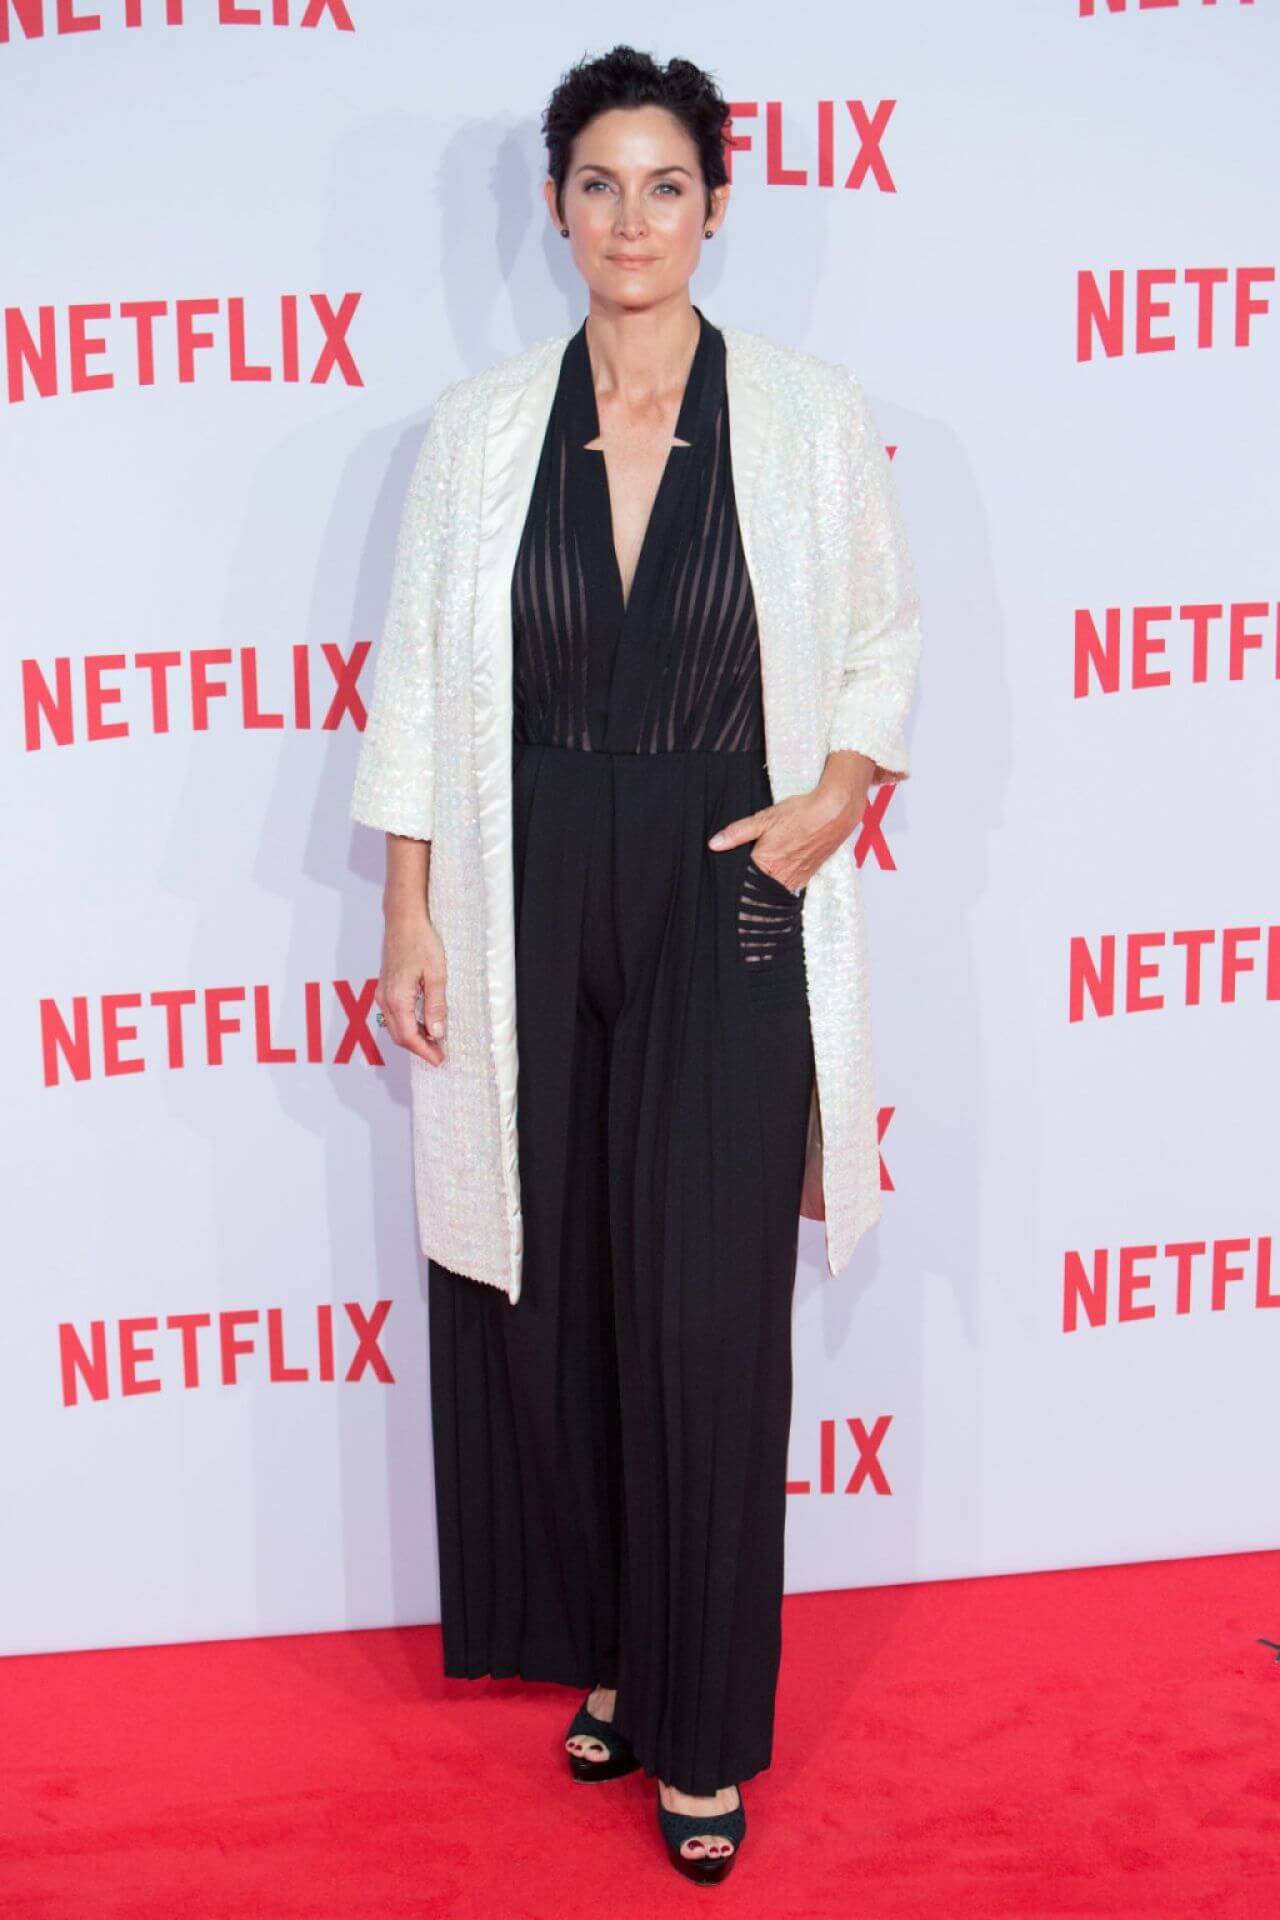 Carrie-Anne Moss  In Black Flare Jumpsuit With White Long Shrug At Netflix Spain’s Presentation Red Carpet in Madrid